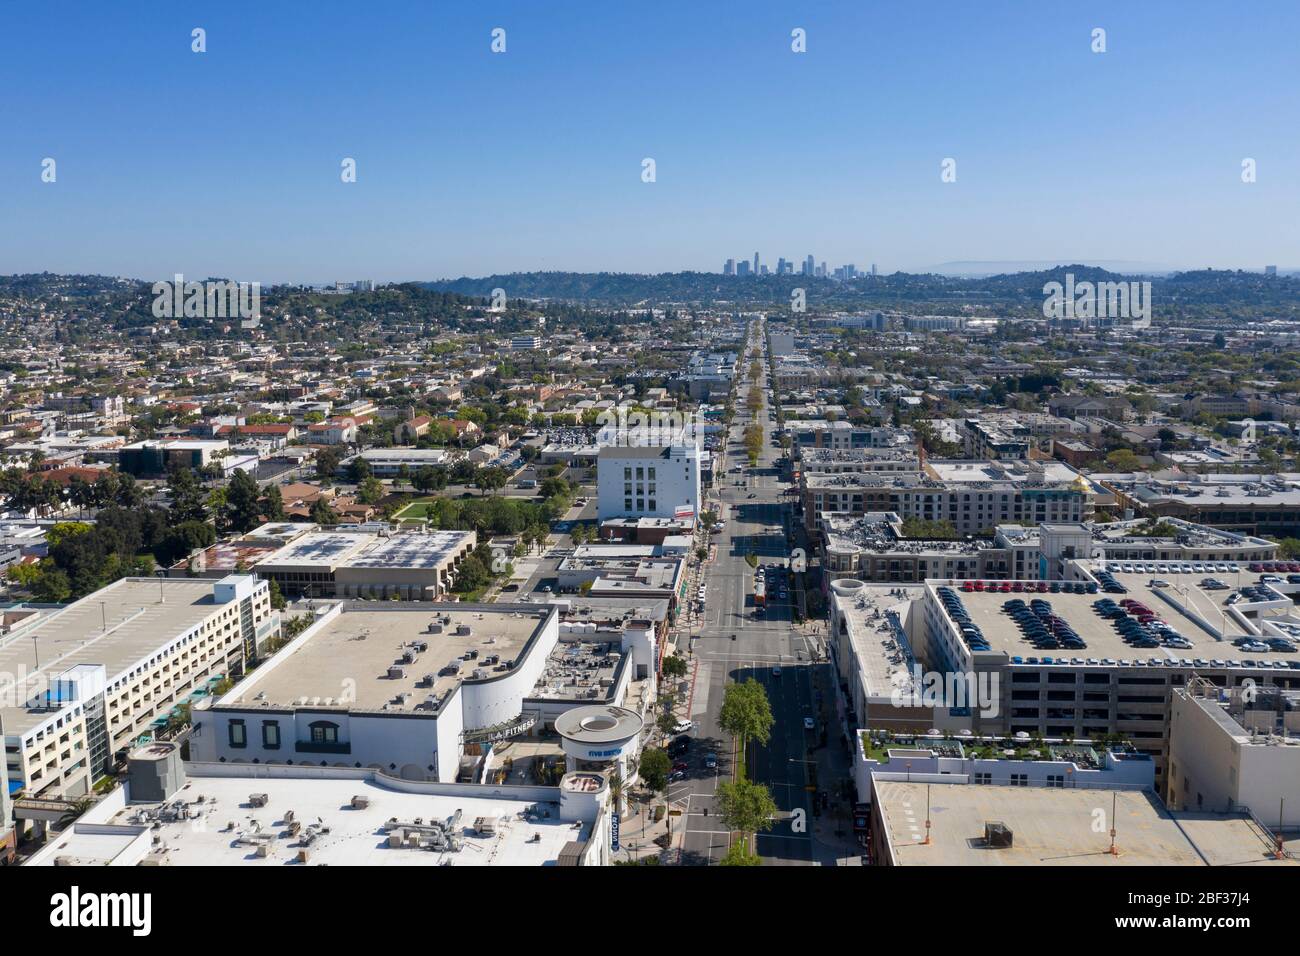 Aerial view looking towards downtown Los Angeles from above central Glendale, California Stock Photo